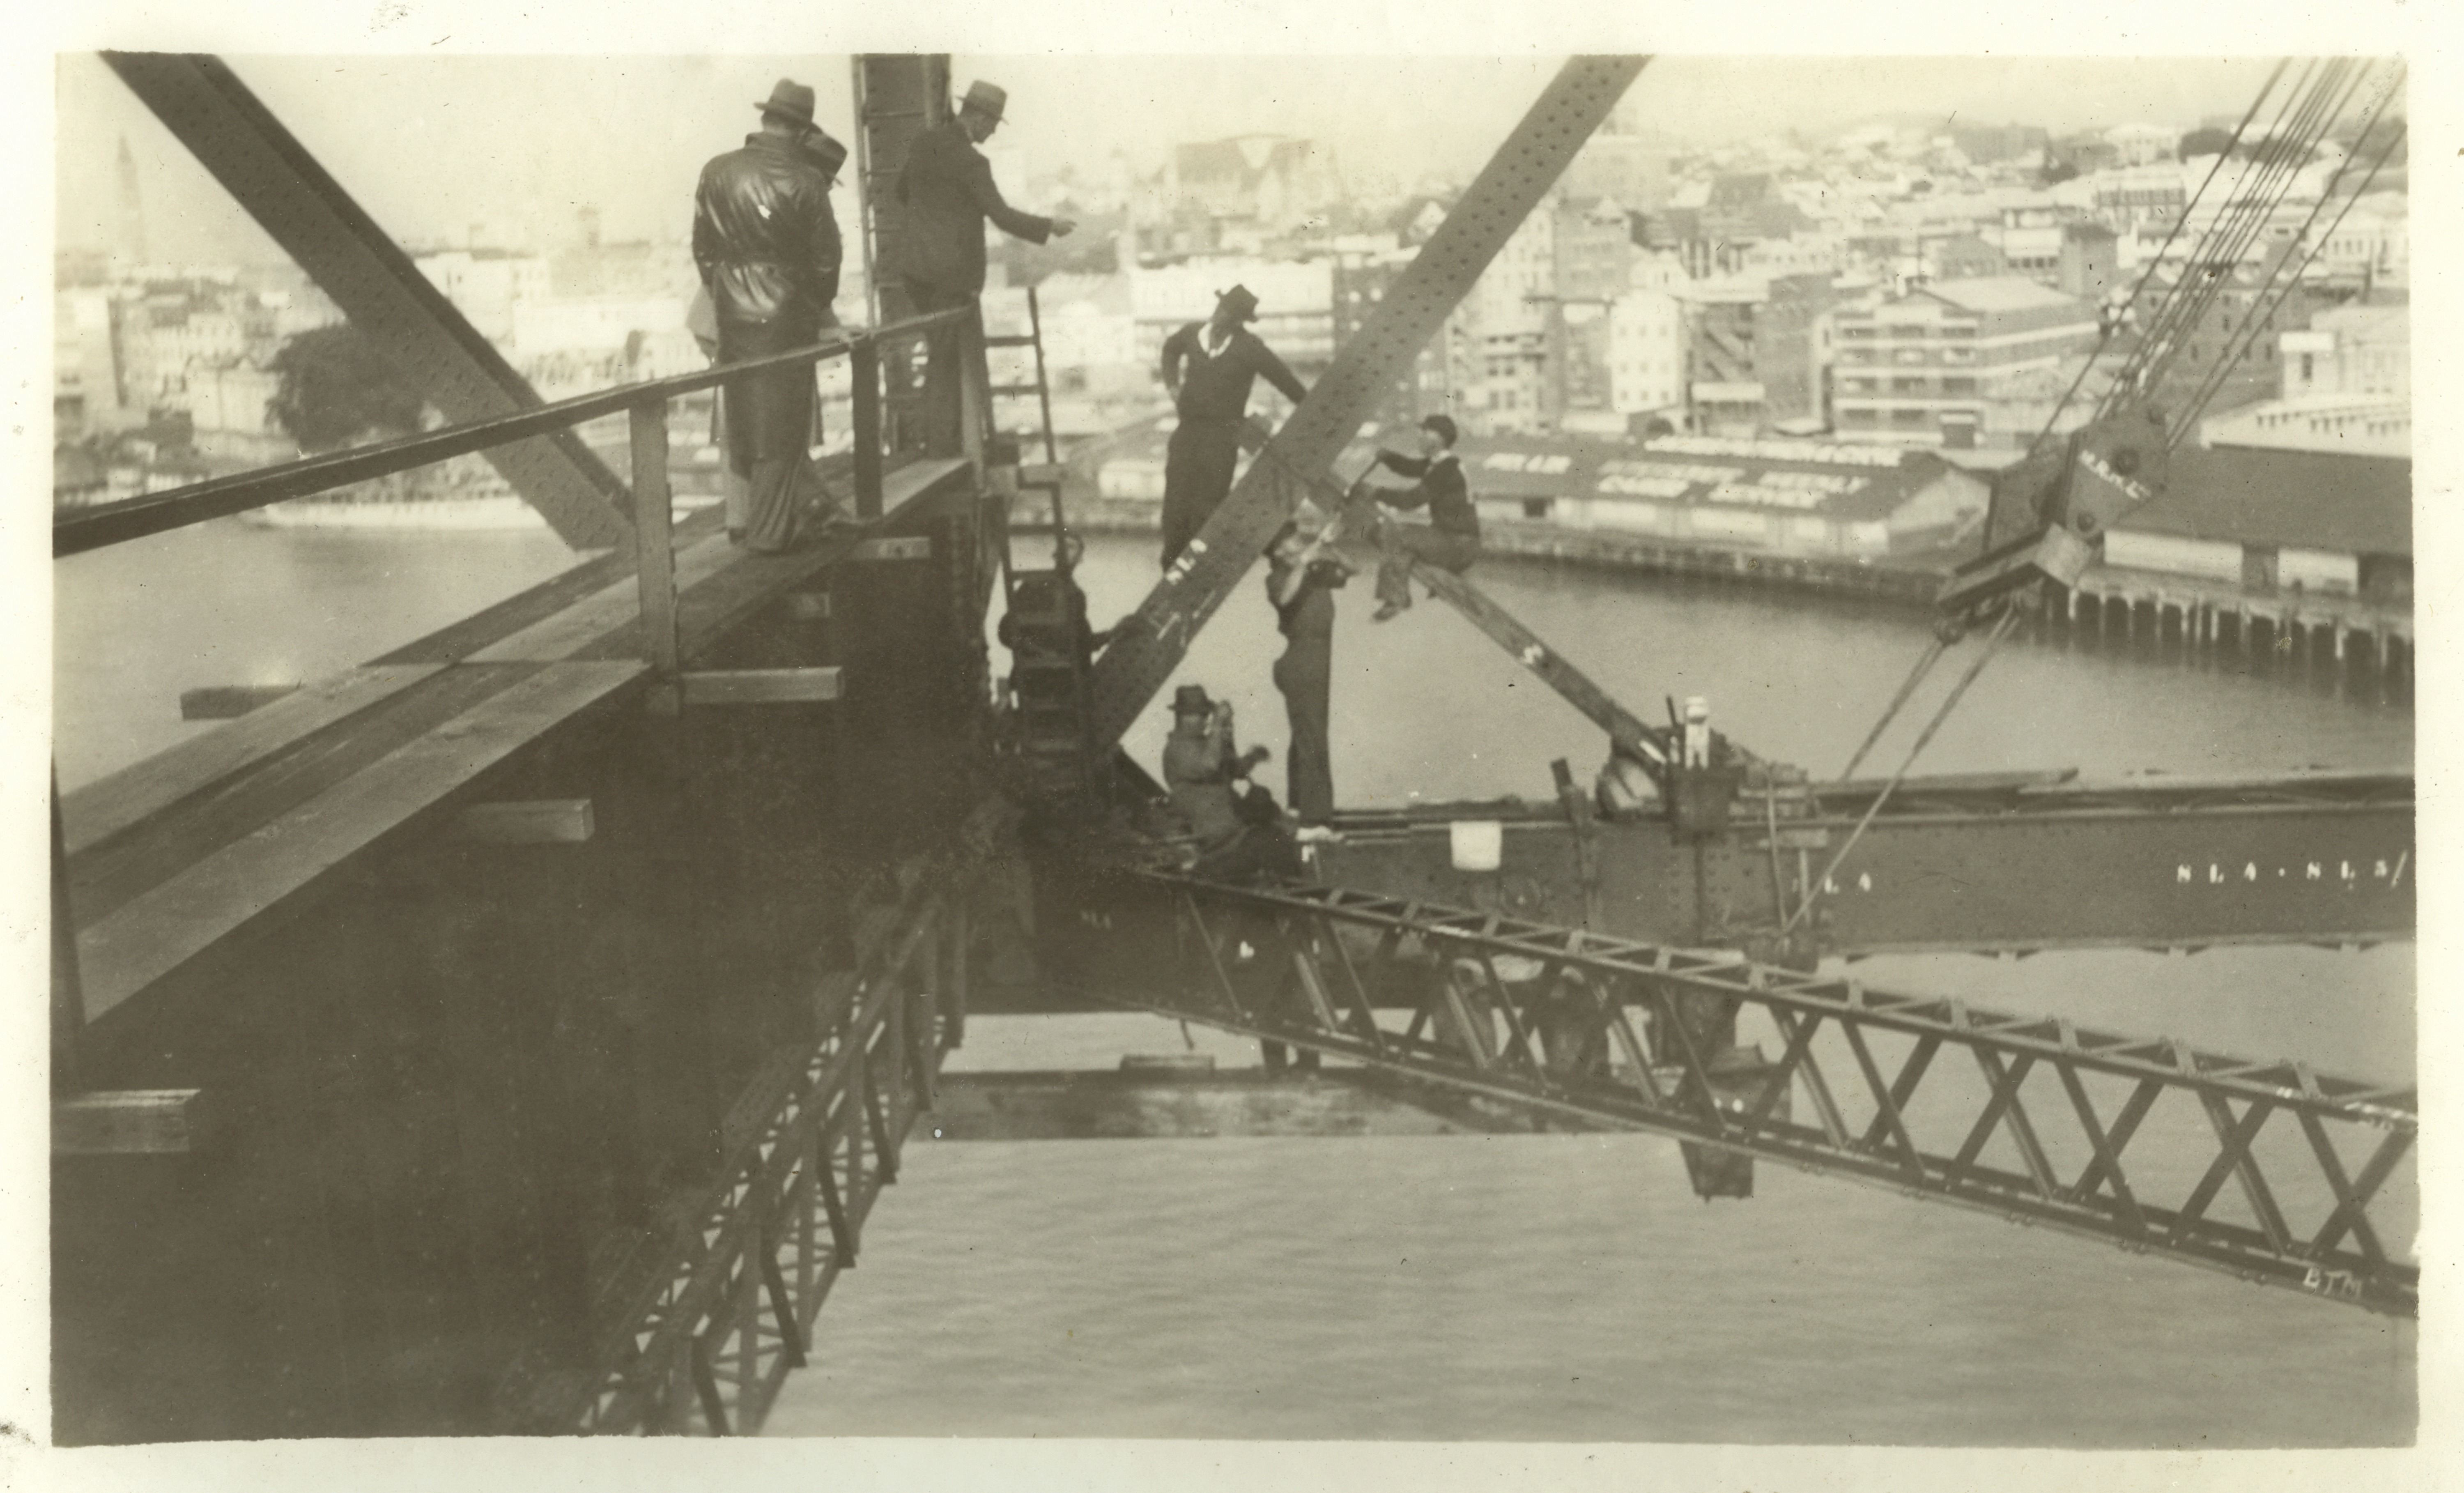 Sepia toned photo taken from the steel support beams of the Storey Bridge, picturing riggers high above the Brisbane River